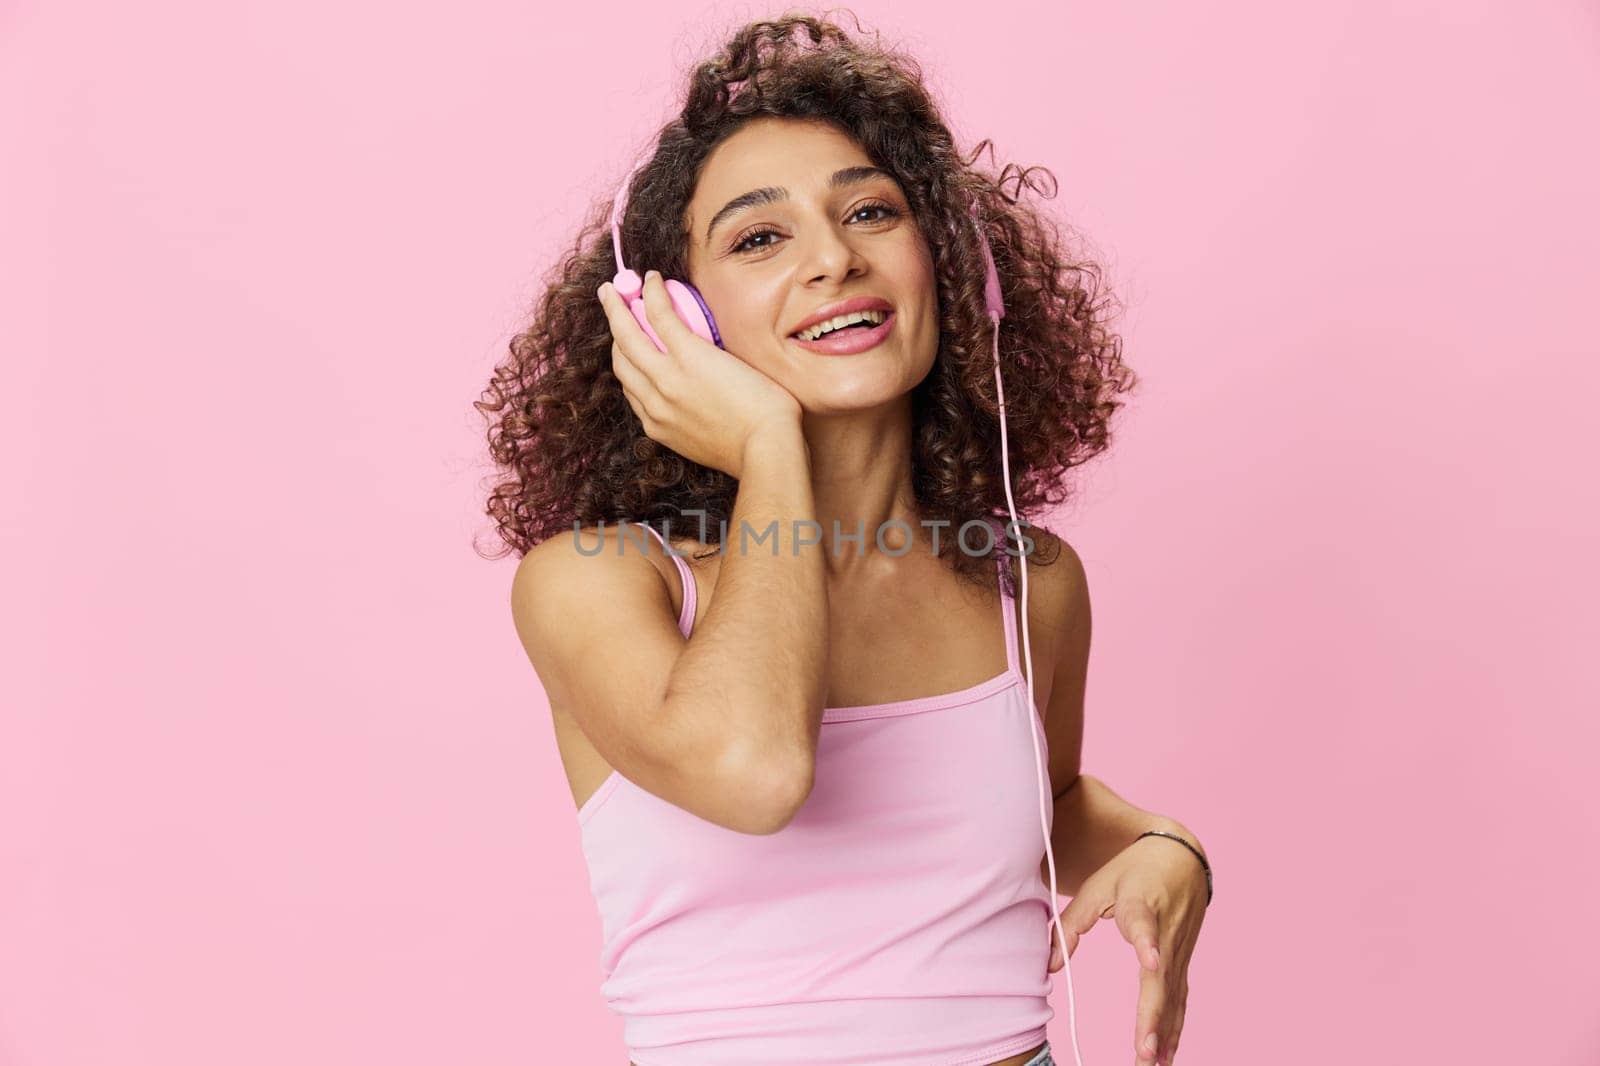 Happy woman wearing headphones with curly hair listening to music and singing along with her eyes closed in a pink T-shirt and jeans on a pink background DJ party, copy space by SHOTPRIME